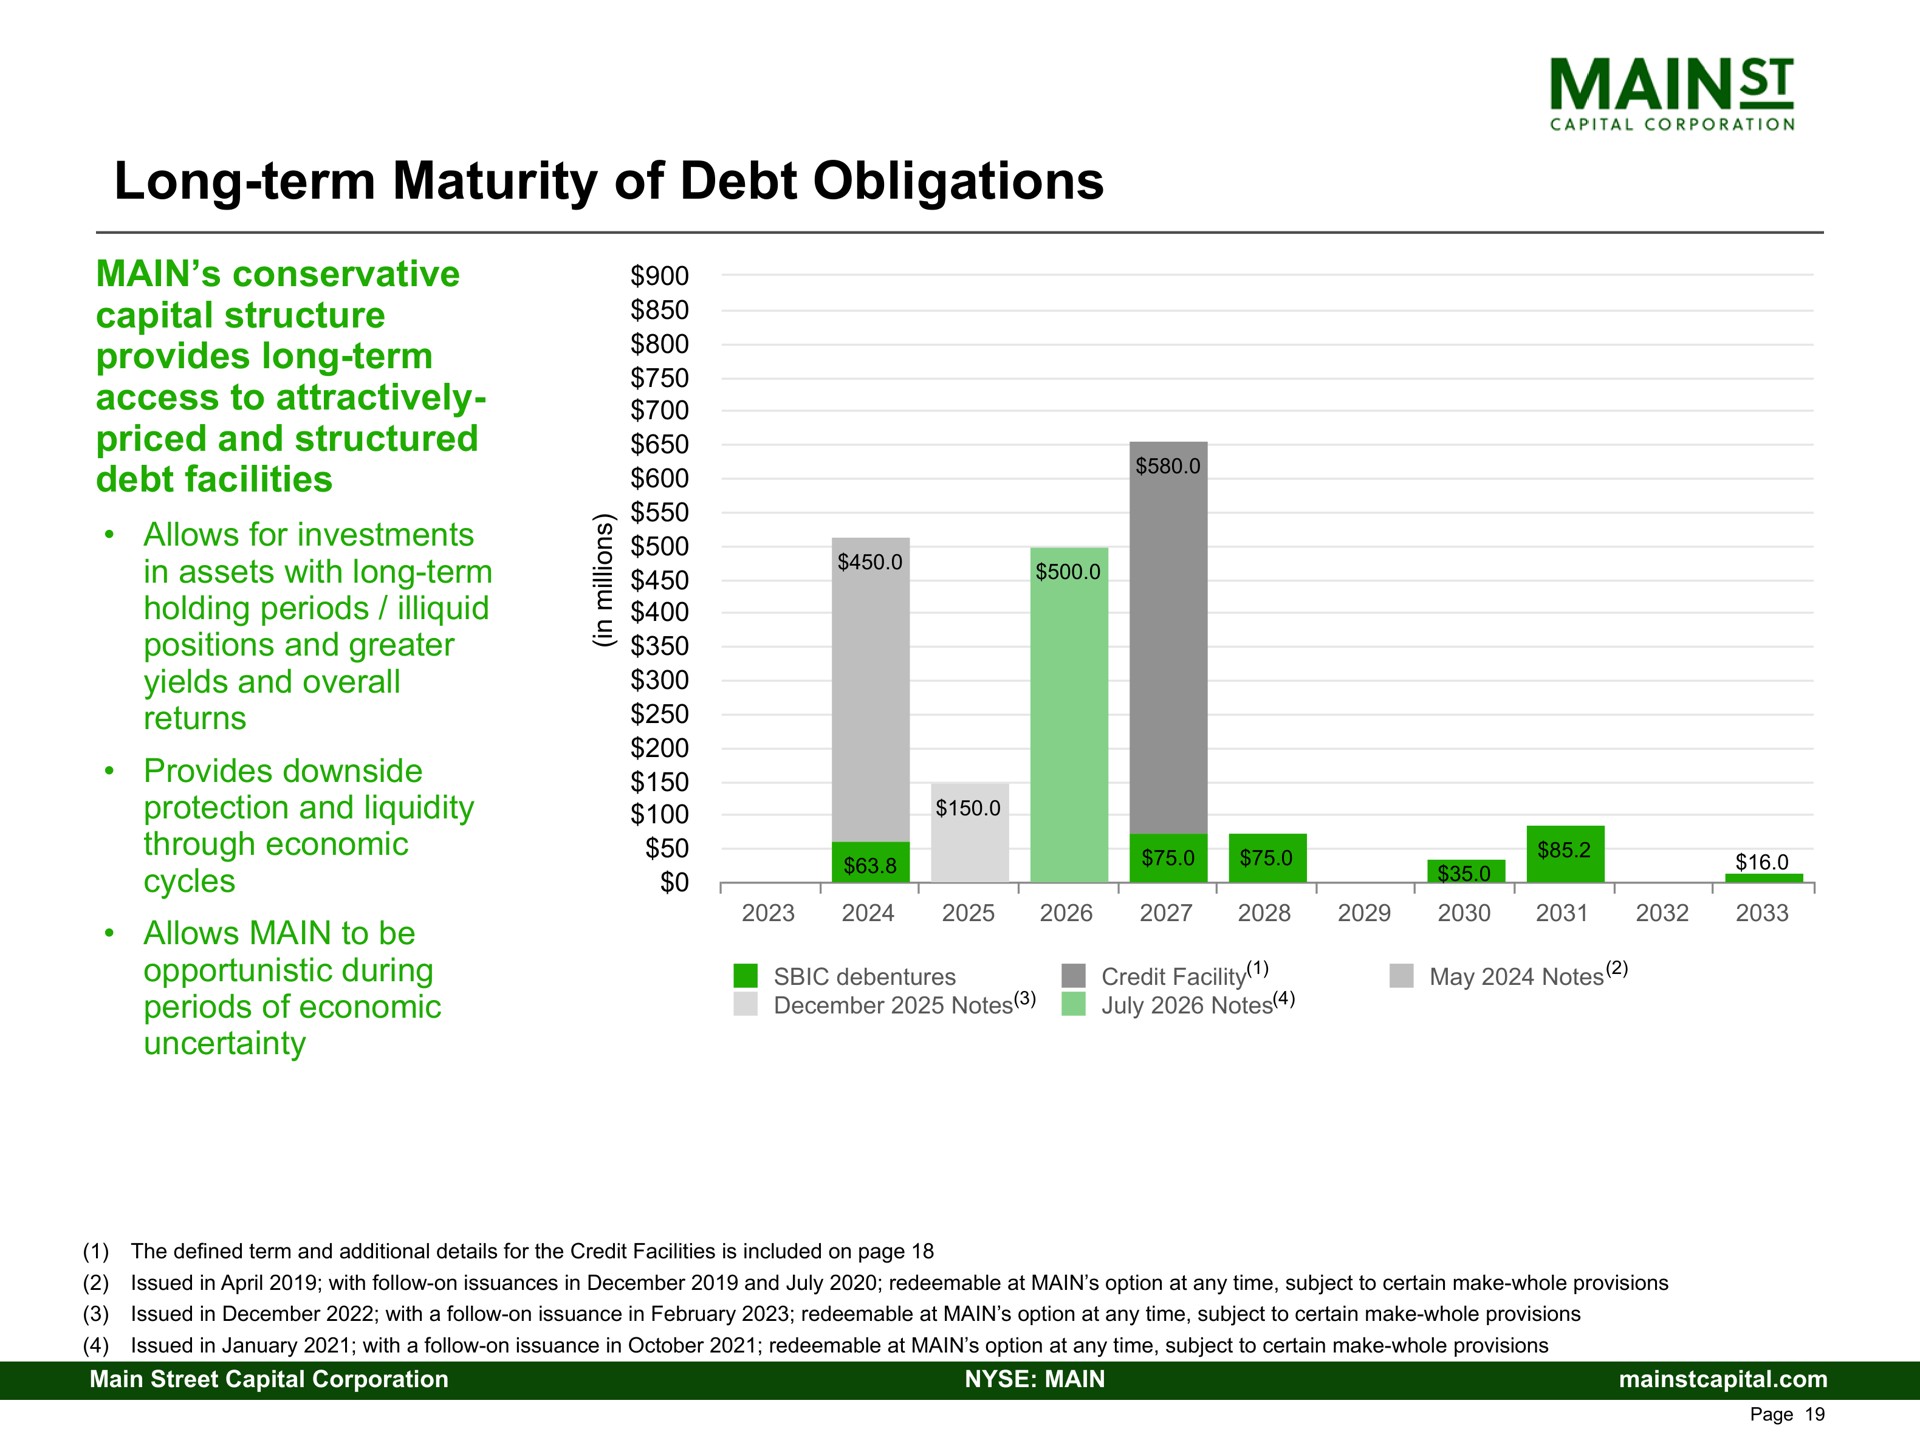 long term maturity of debt obligations main conservative capital structure provides long term access to attractively priced and structured debt facilities in assets with | Main Street Capital